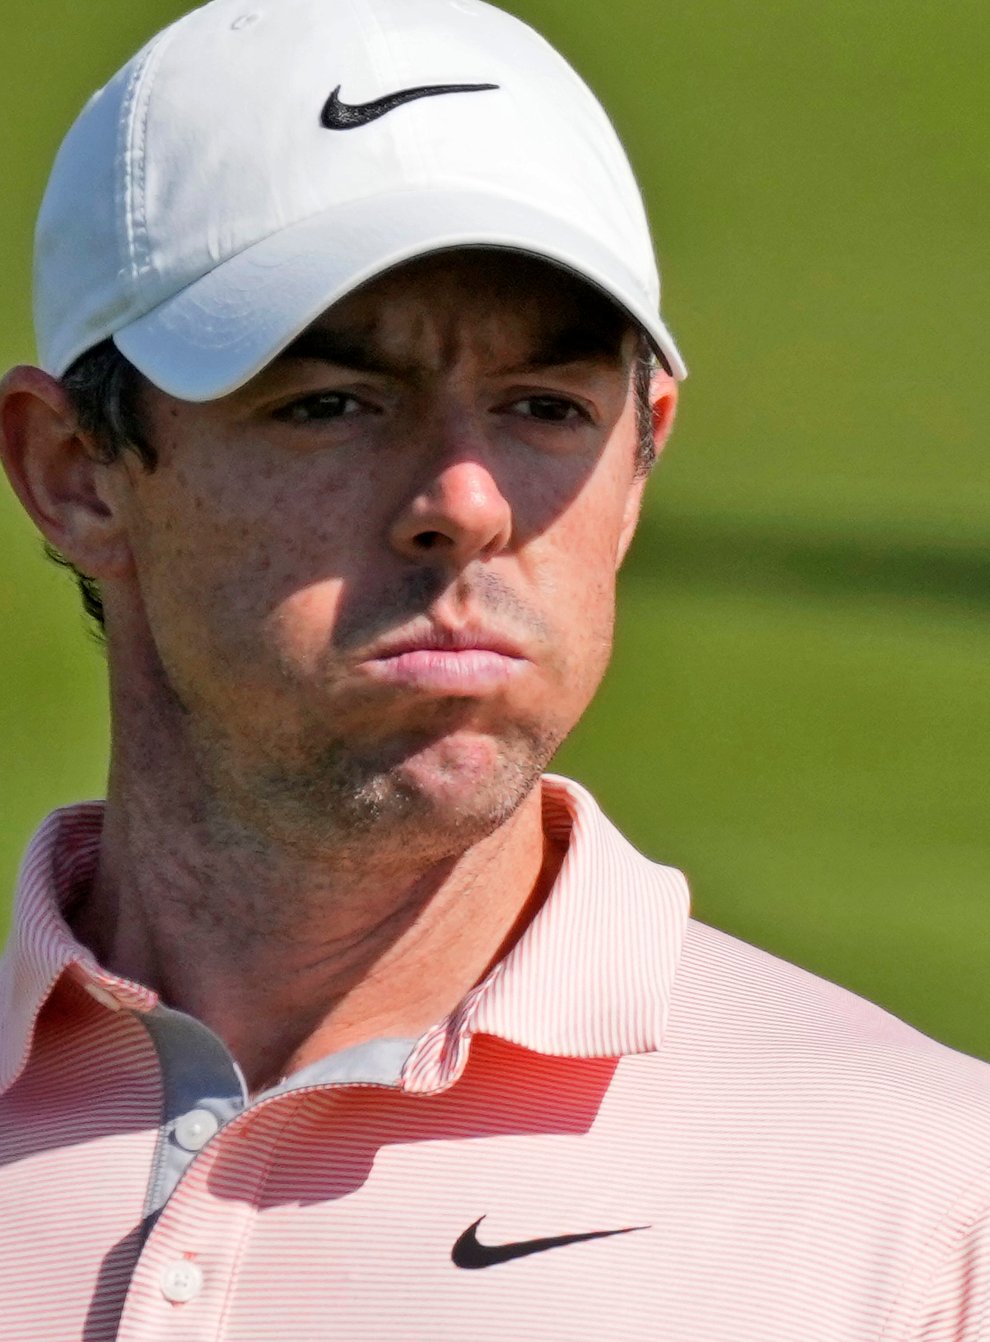 Rory McIlroy aims to bounce back from a poor finish in Abu Dhabi in the Dubai Desert Classic (Kamran Jebreili/AP)